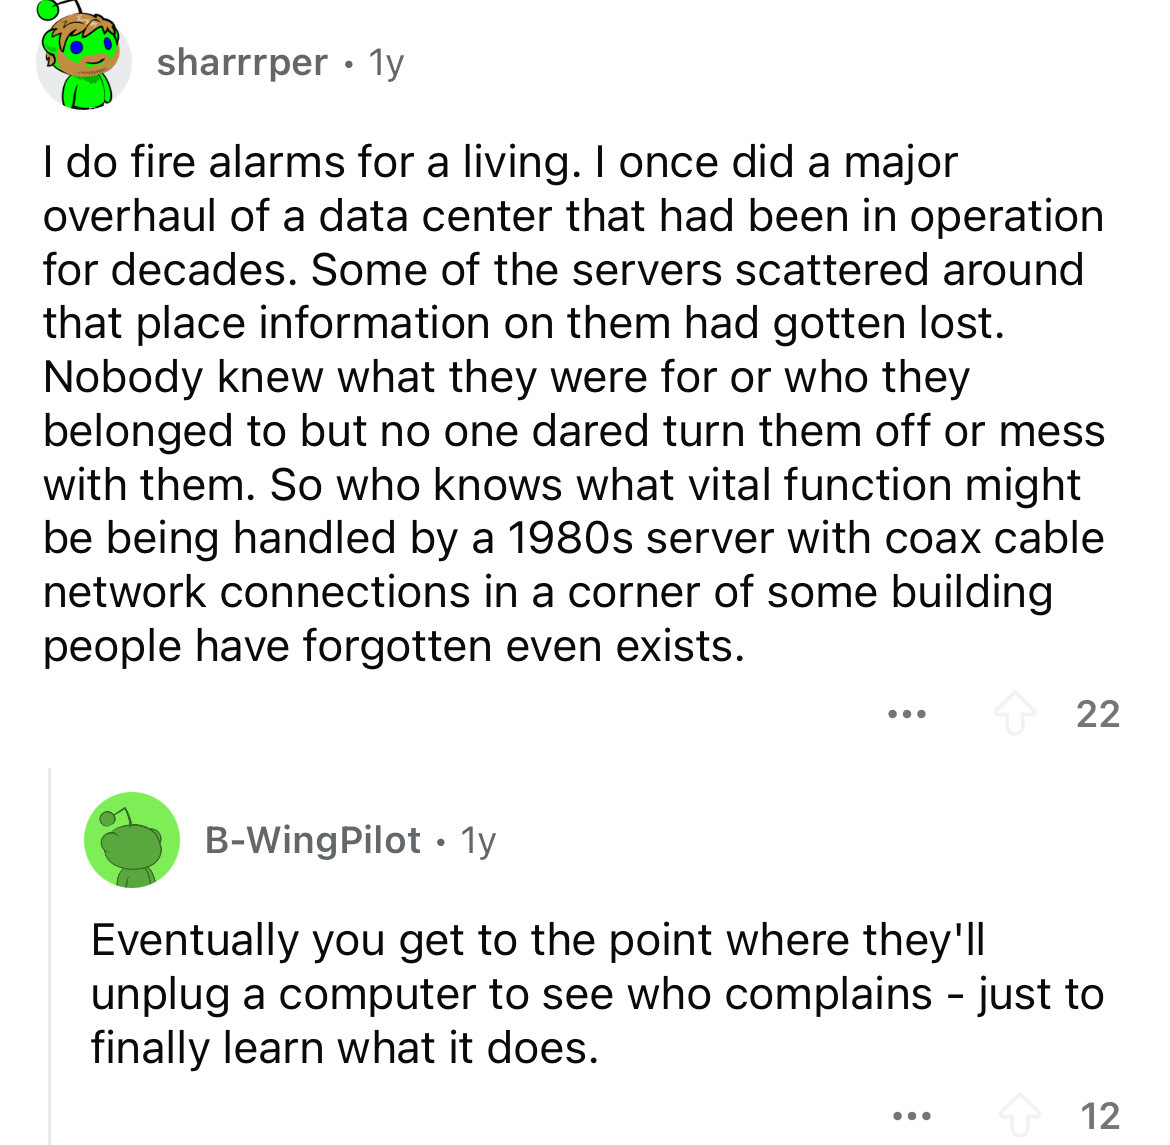 screenshot - sharrrper 1y I do fire alarms for a living. I once did a major overhaul of a data center that had been in operation for decades. Some of the servers scattered around that place information on them had gotten lost. Nobody knew what they were f